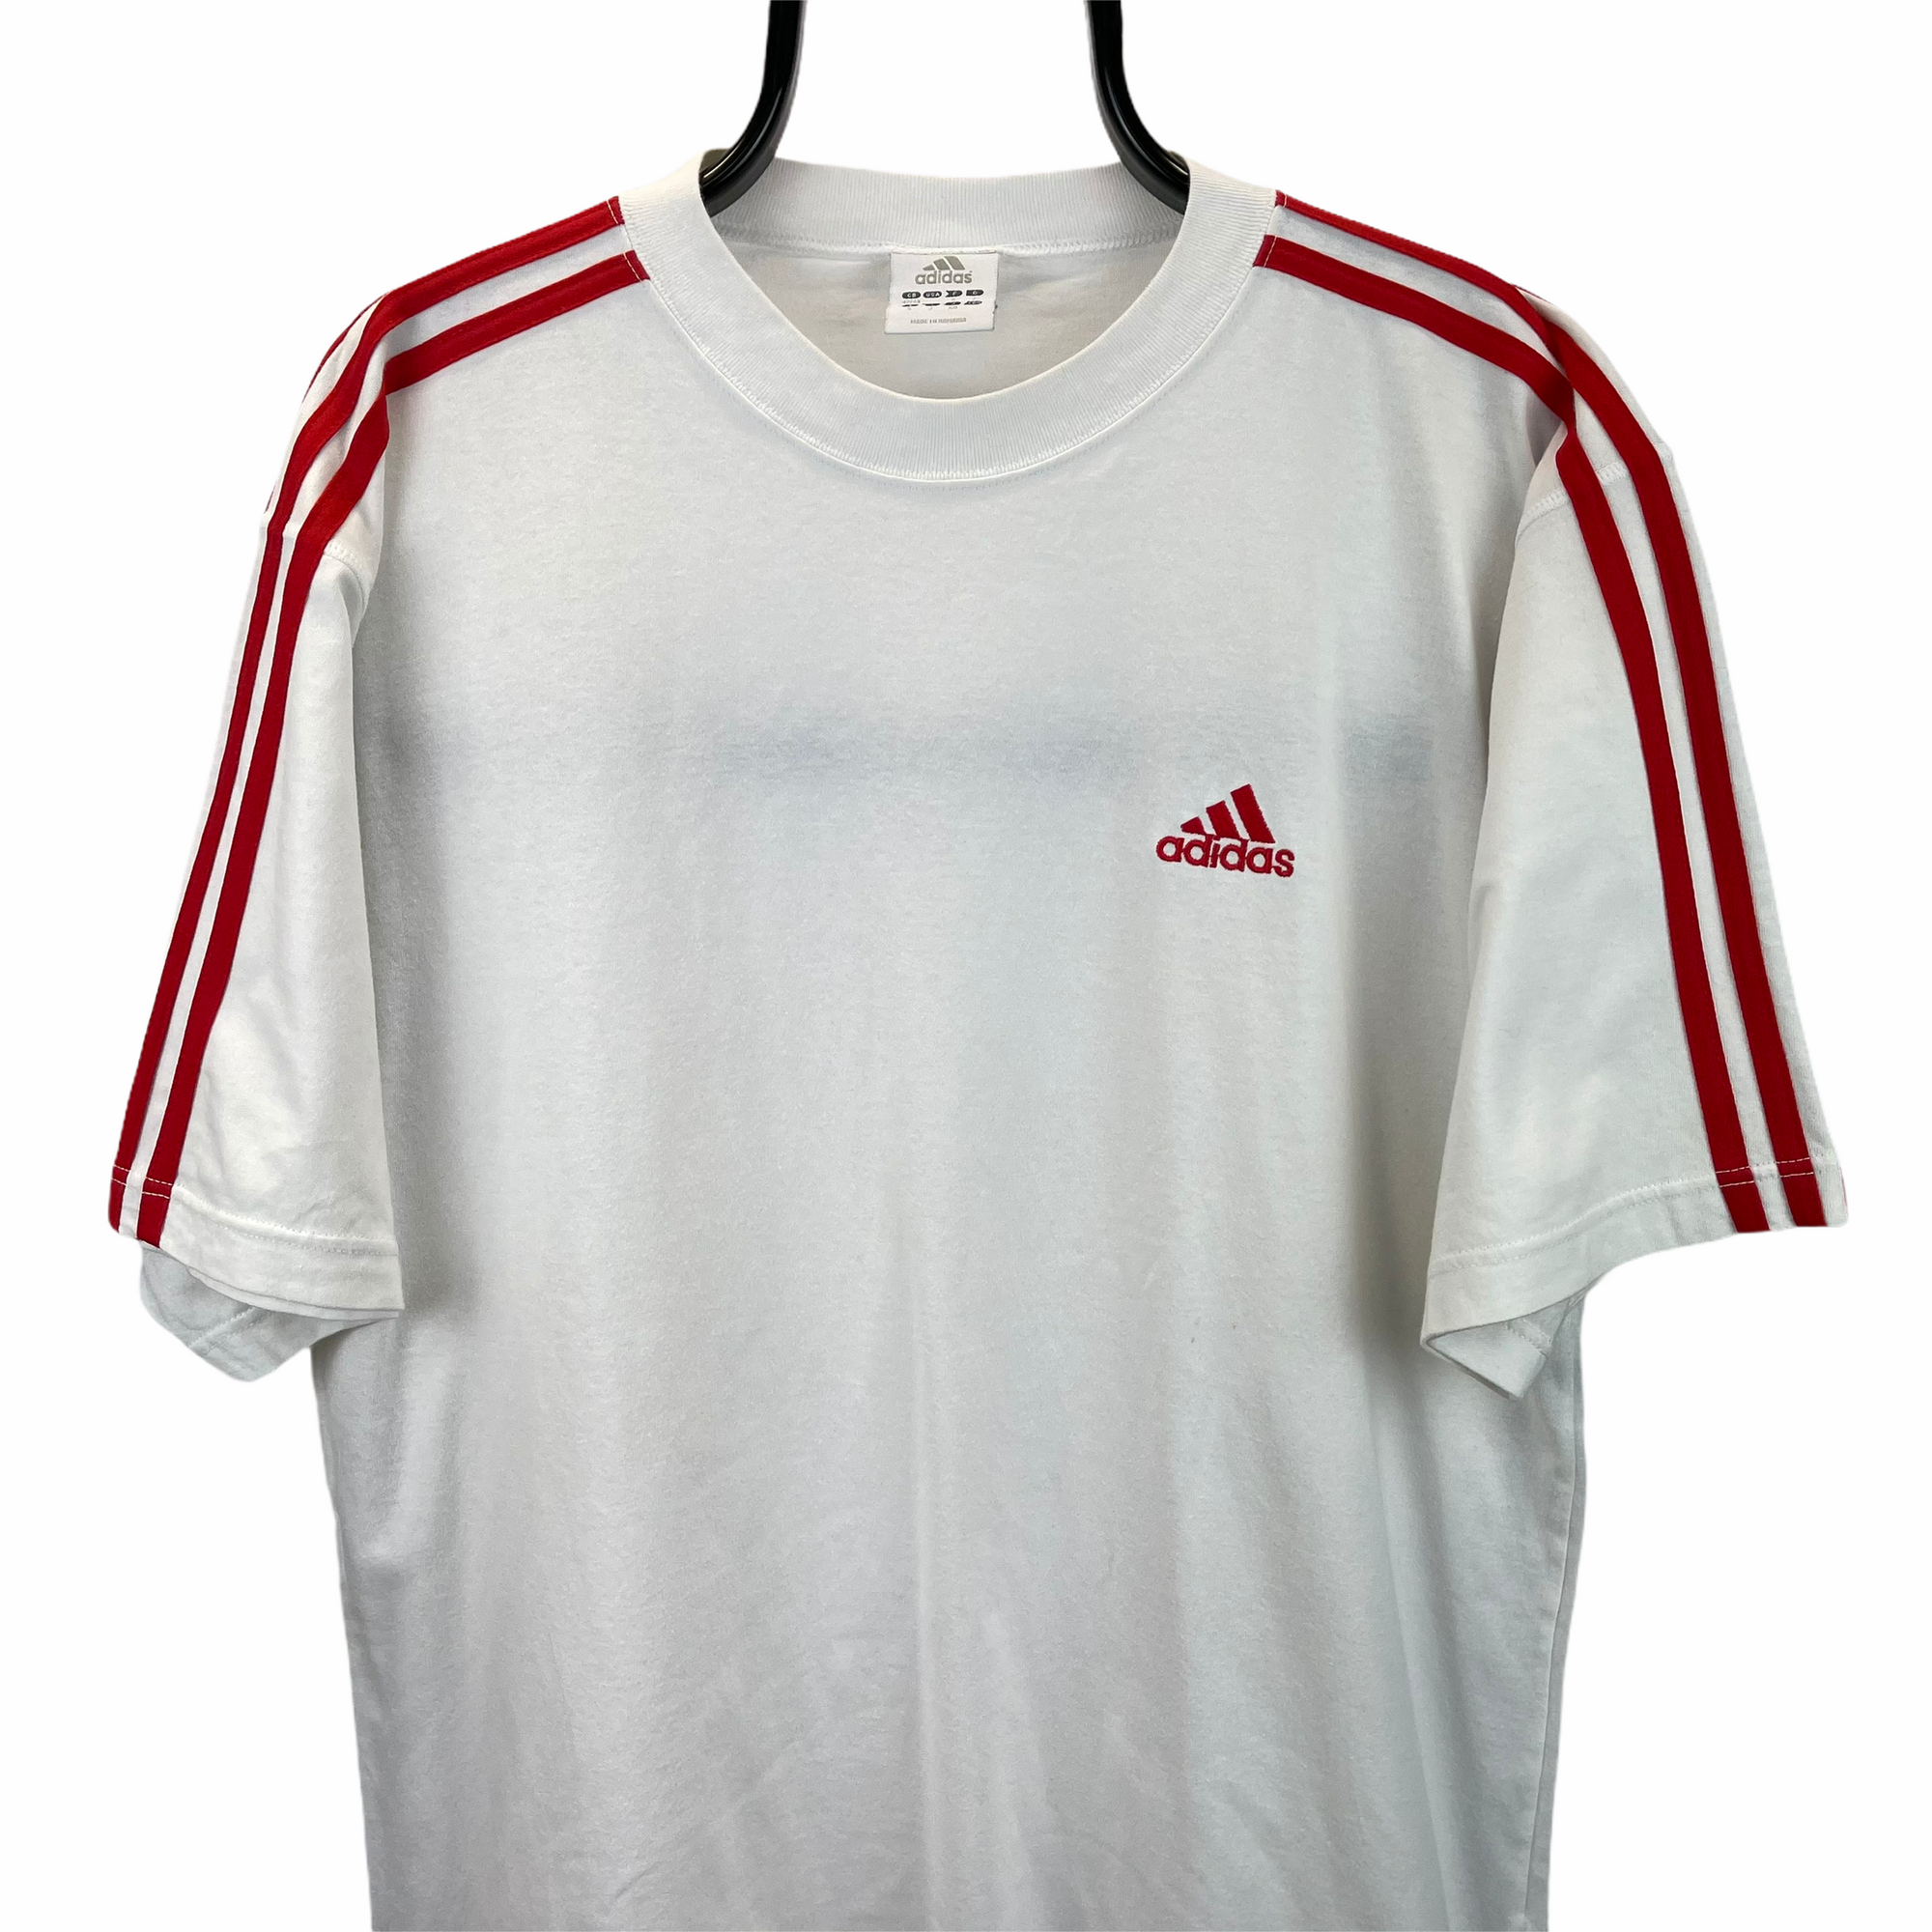 Vintage Adidas Embroidered Logo Tee in Red & White - Men's Large/Women's XL